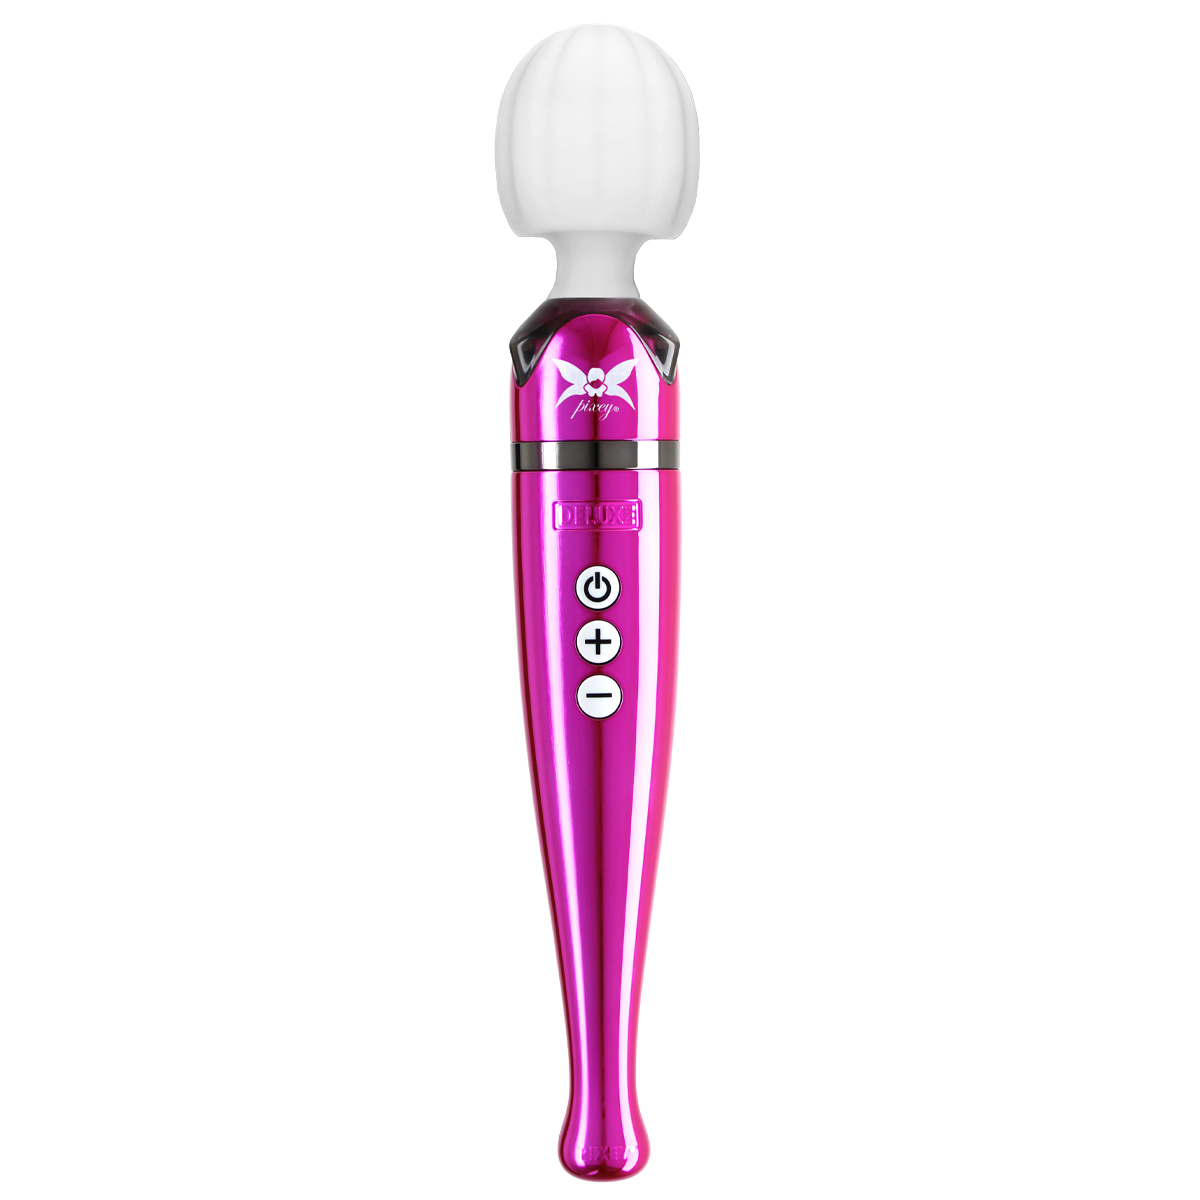 Pixey Deluxe Wand Massager pink chrome